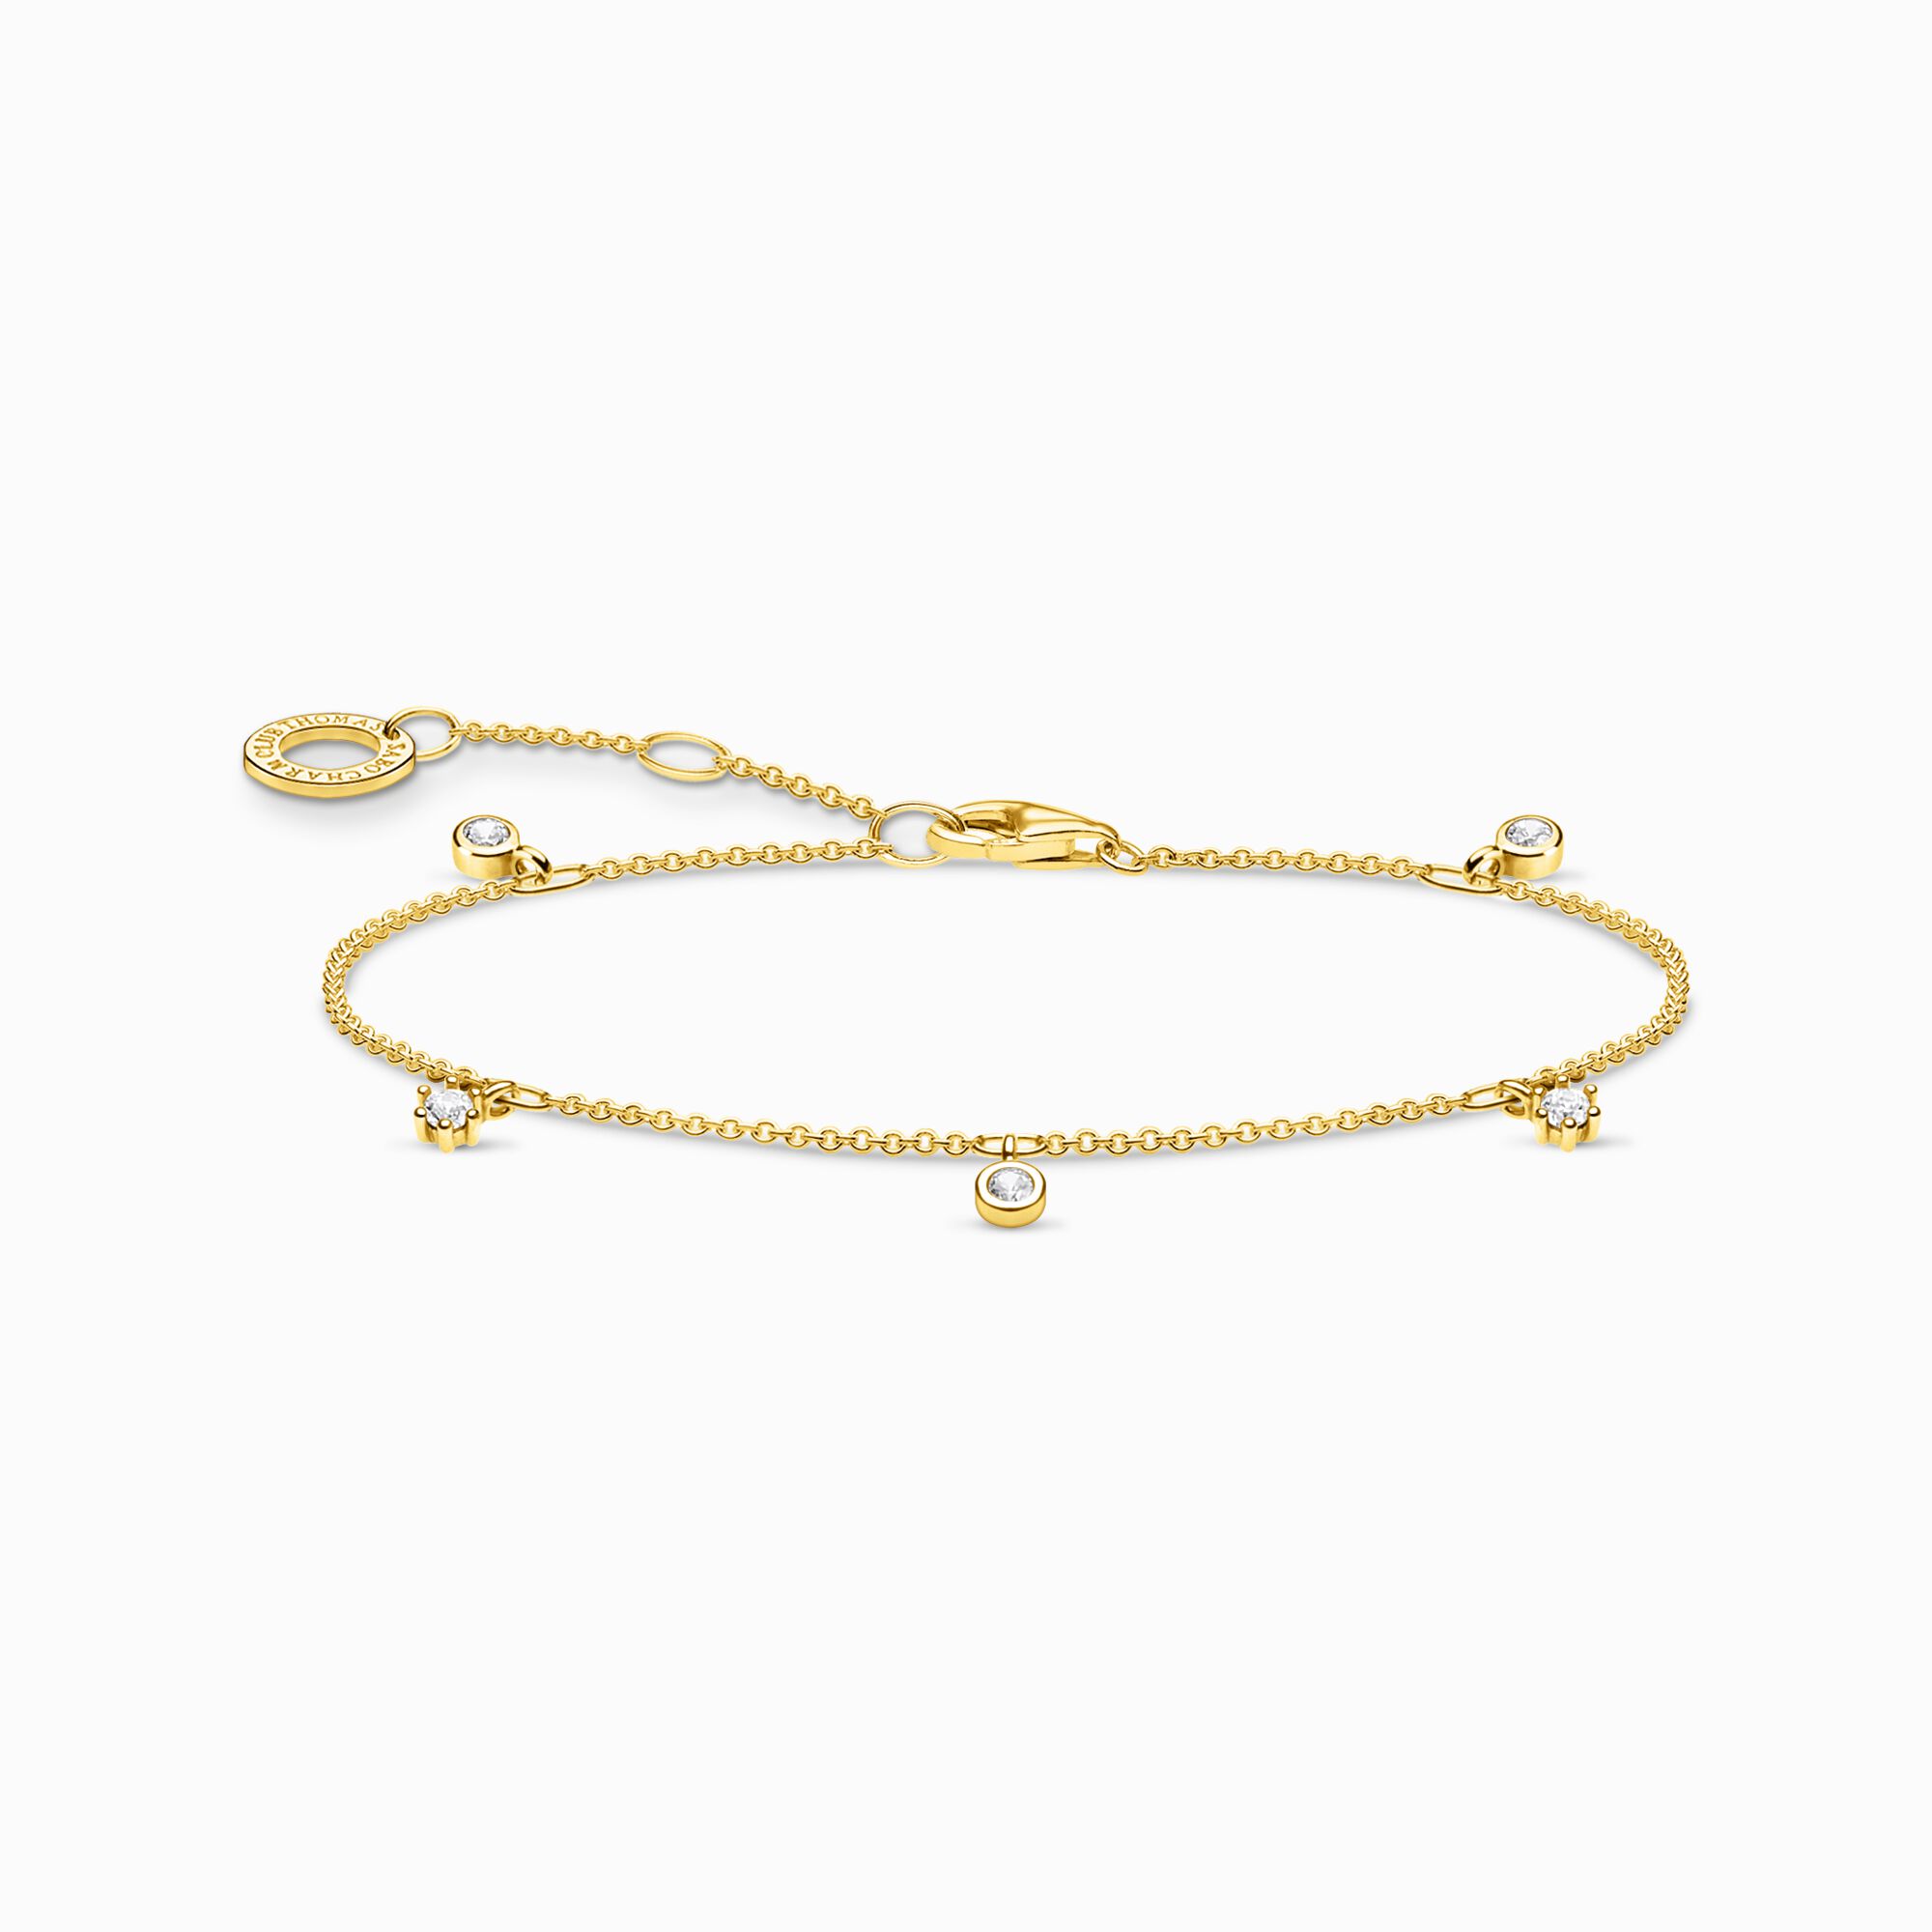 Bracelet white stones gold from the Charming Collection collection in the THOMAS SABO online store